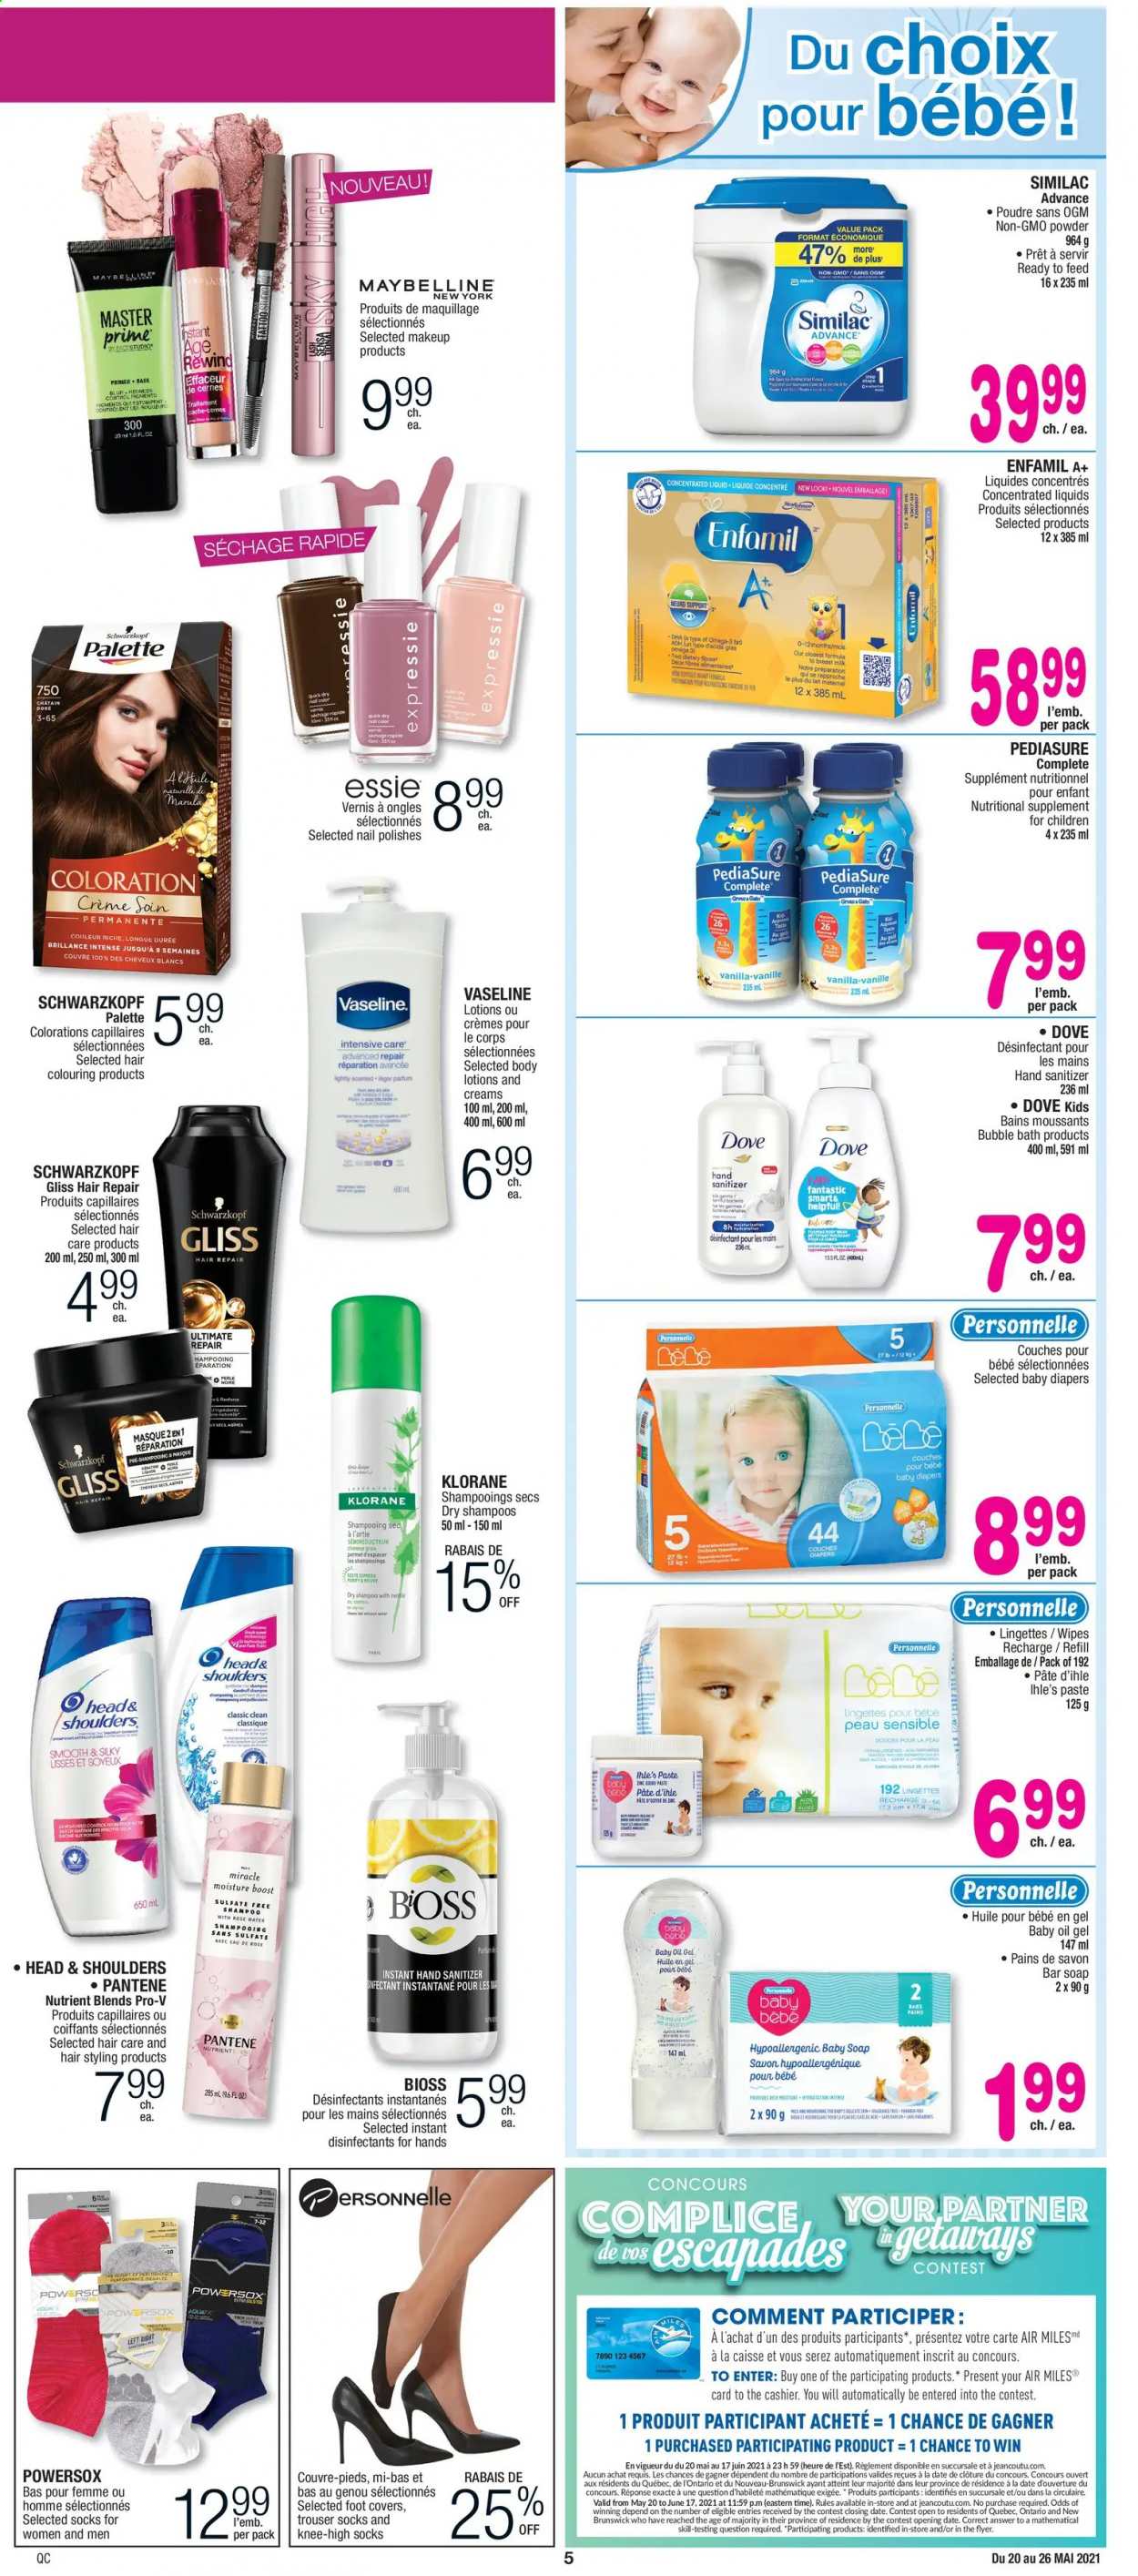 thumbnail - Jean Coutu Flyer - May 20, 2021 - May 26, 2021 - Sales products - oil, Boost, wipes, nappies, baby oil, bubble bath, Gliss, Vaseline, soap bar, soap, Klorane, hand sanitizer, quick dry, makeup, socks, nutritional supplement, Maybelline, shampoo, Head & Shoulders, Palette, Pantene. Page 3.